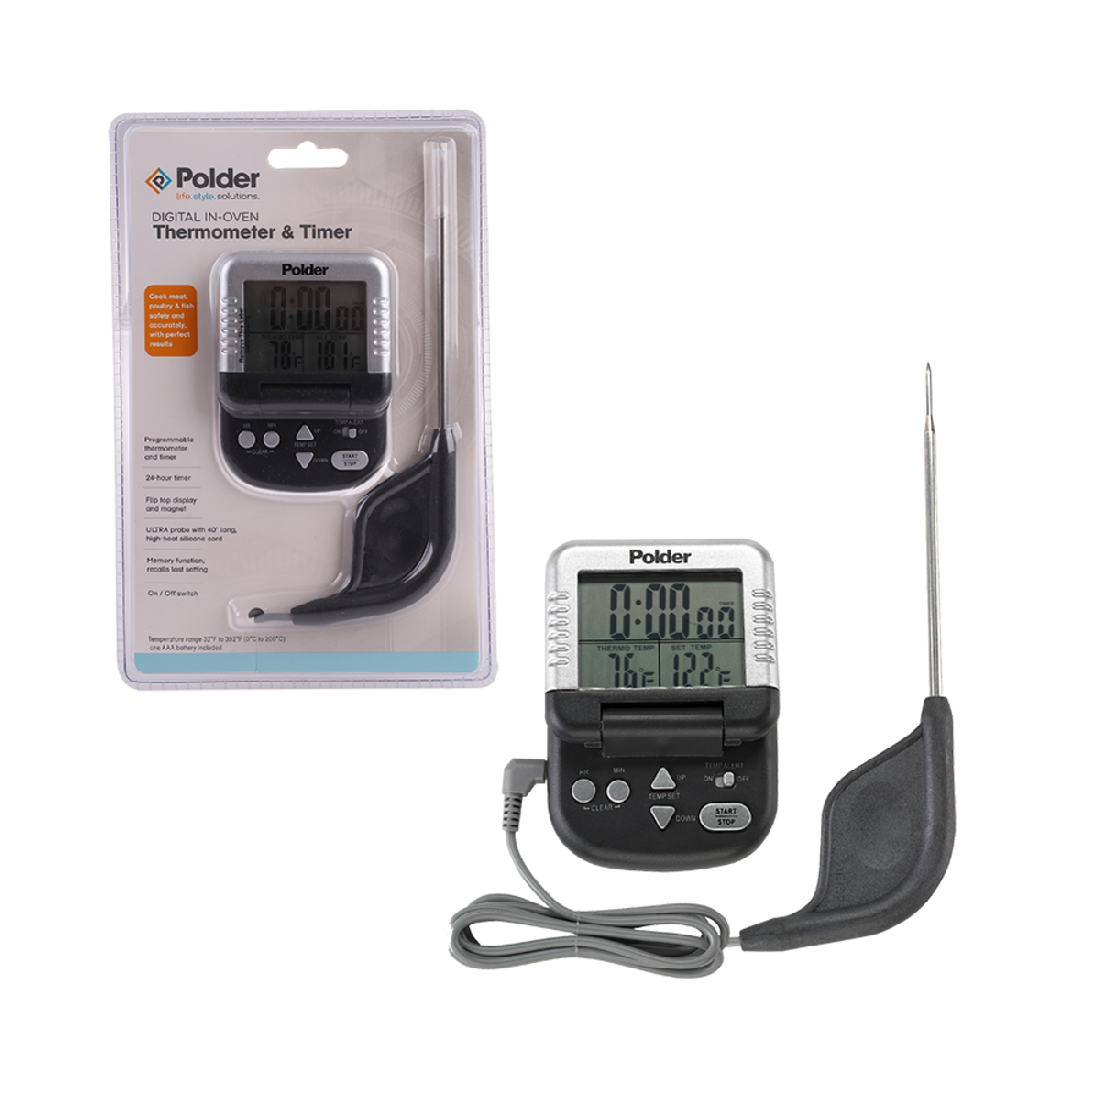 Polder Digital In-oven Thermometer & Timer